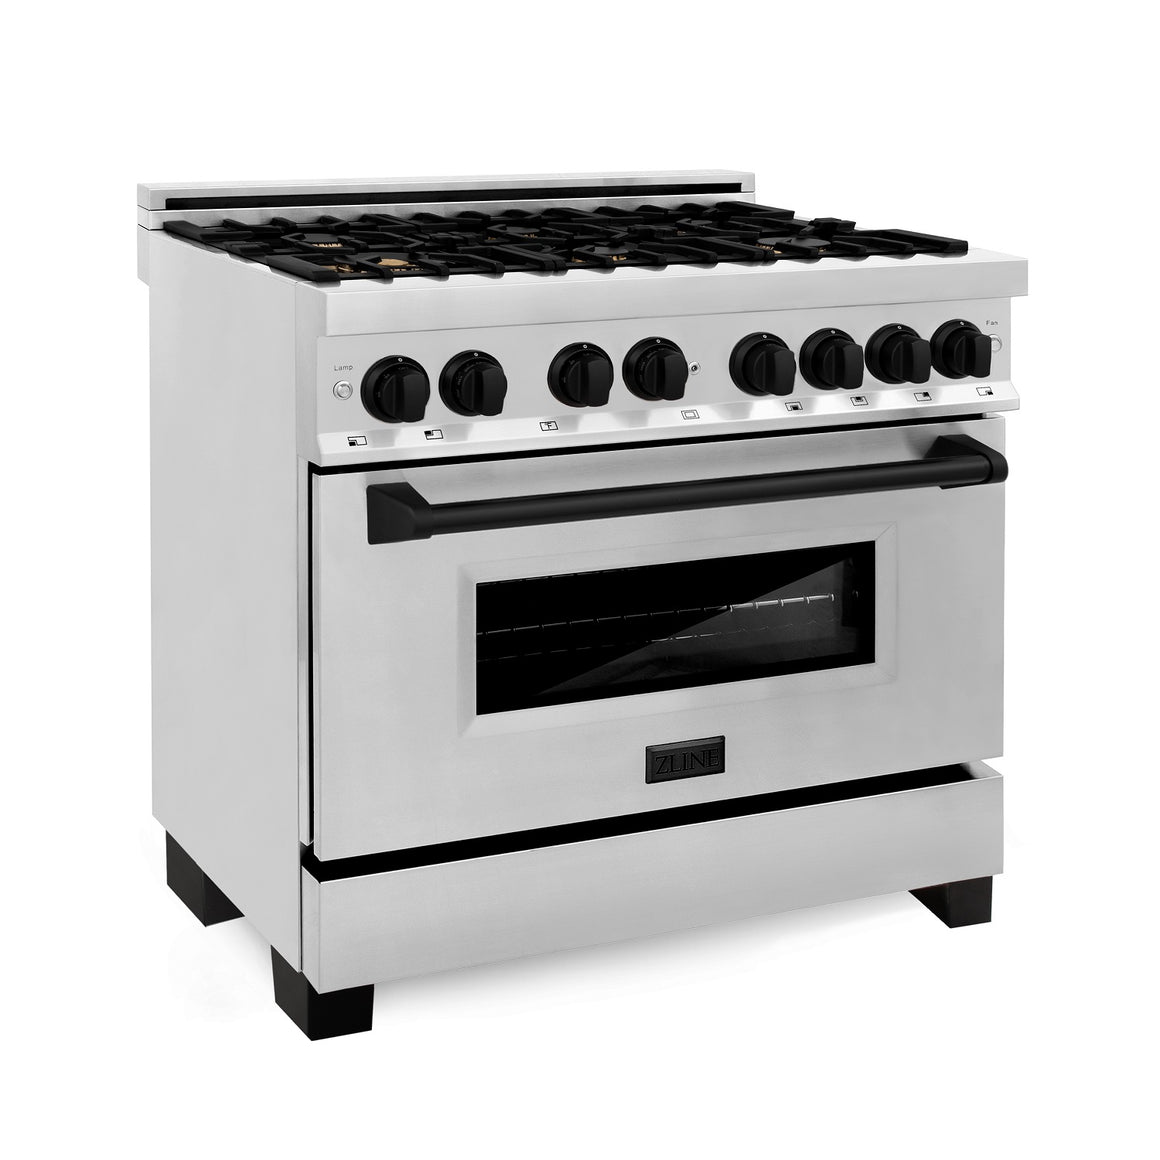 ZLINE Autograph Edition 36" 4.6 cu. ft. Dual Fuel Range in Stainless Steel with Matte Black Accents